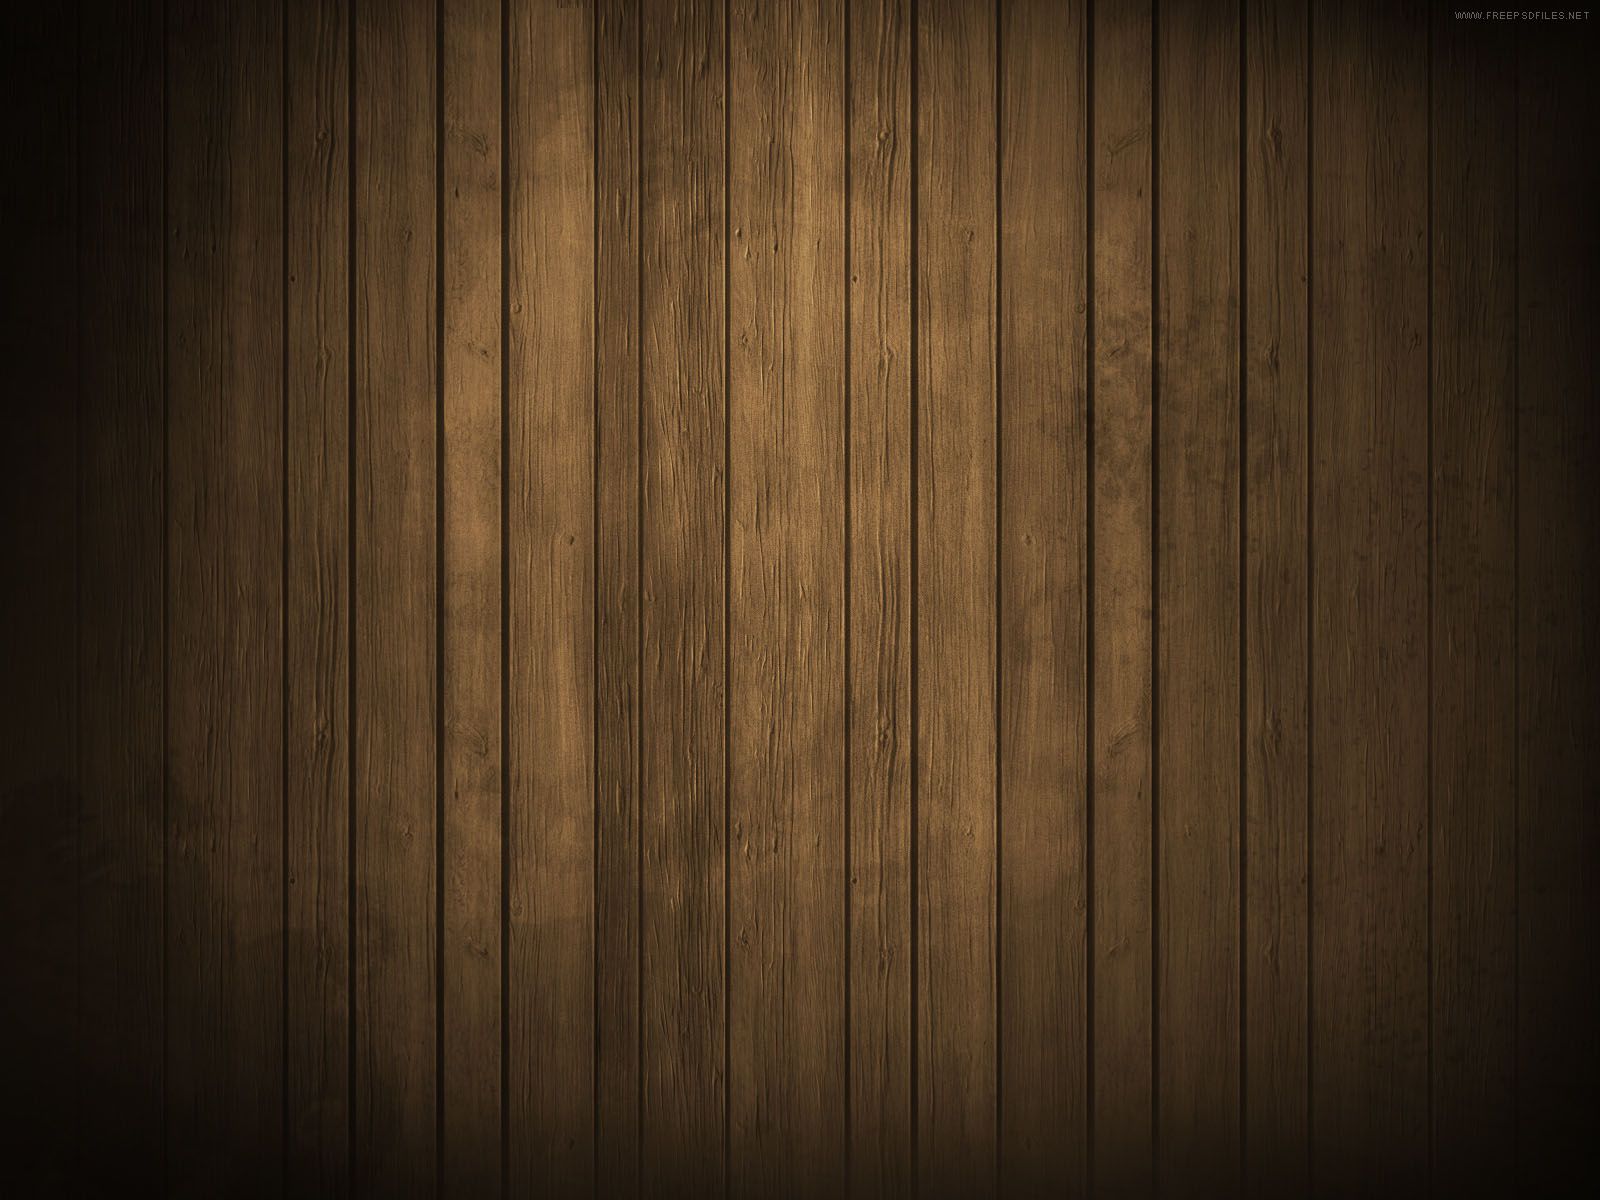 Wood background hd free stock photos download Free stock ...